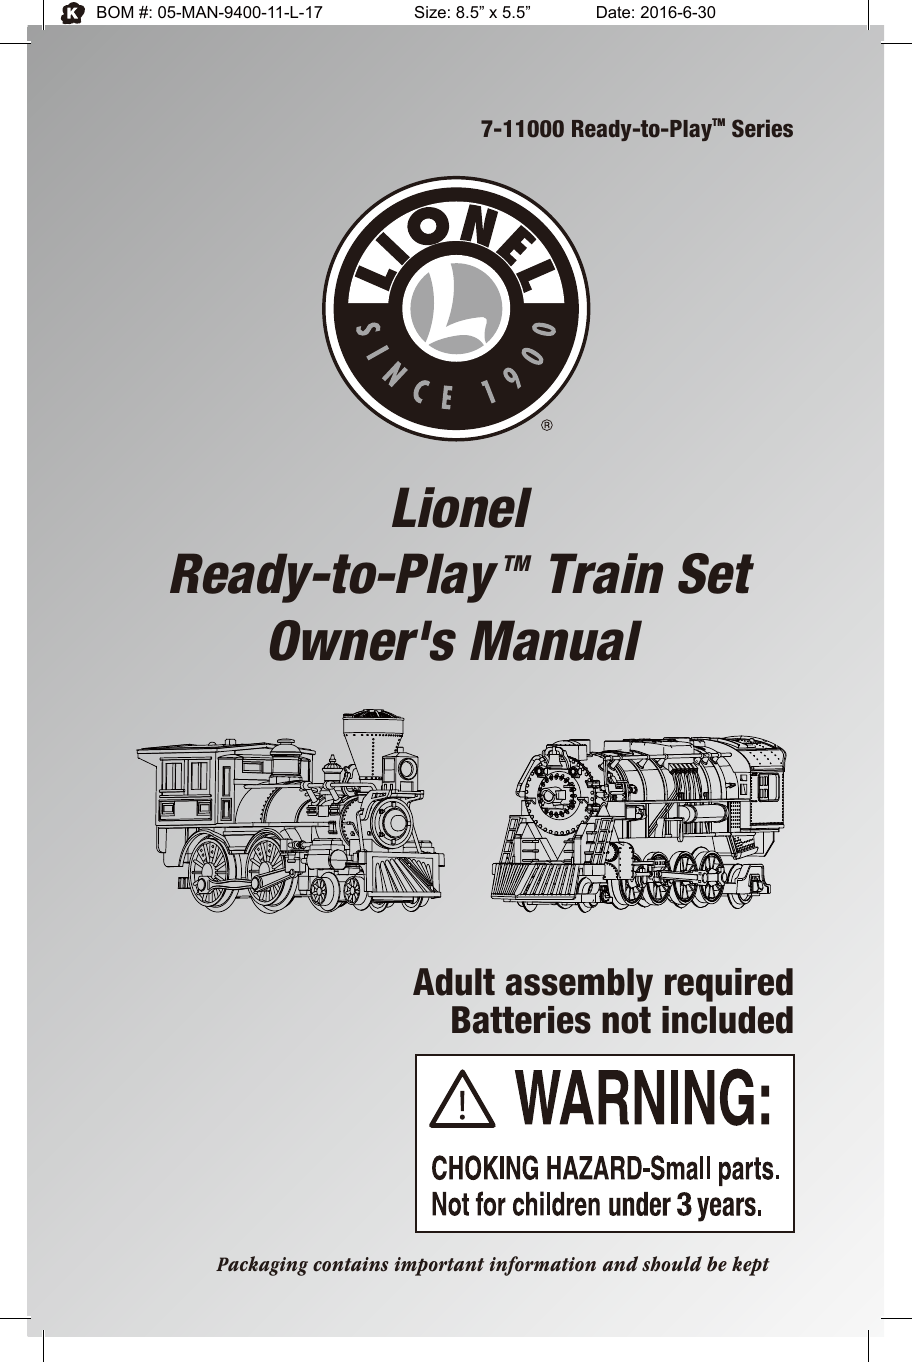 7-11000 Ready-to-PlayTM SeriesLionelReady-to-Play TM Train SetOwner&apos;s Manual Adult assembly requiredBatteries not includedPackaging contains important information and should be keptBOM #: 05-MAN-9400-11-L-17     Size: 8.5” x 5.5”    Date: 2016-6-30